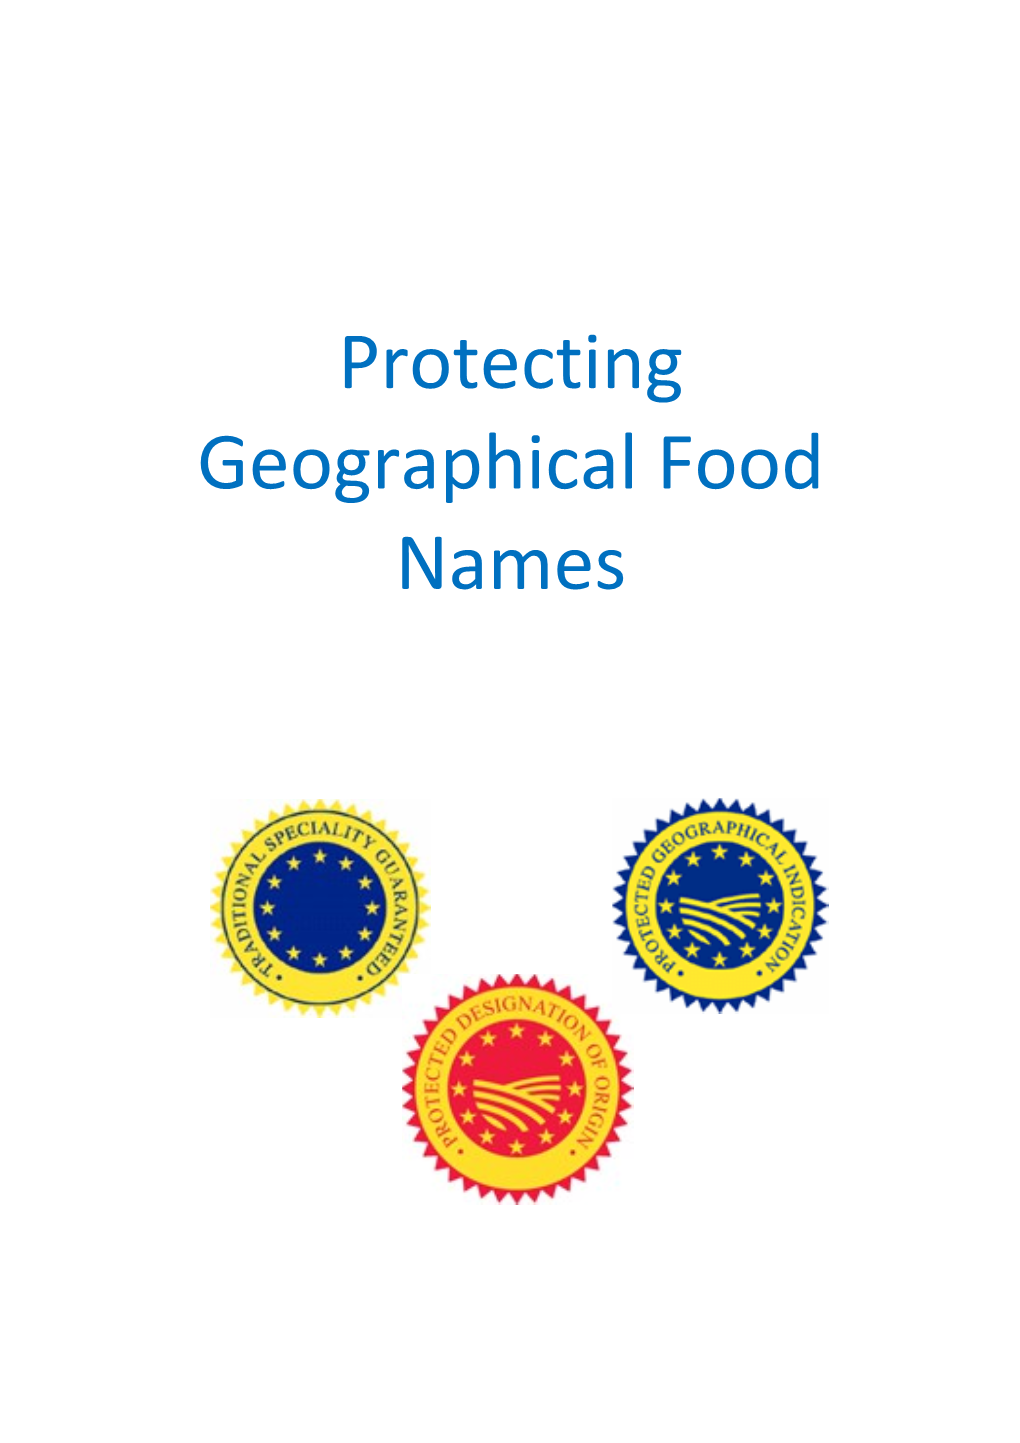 Protecting Geographical Food Names